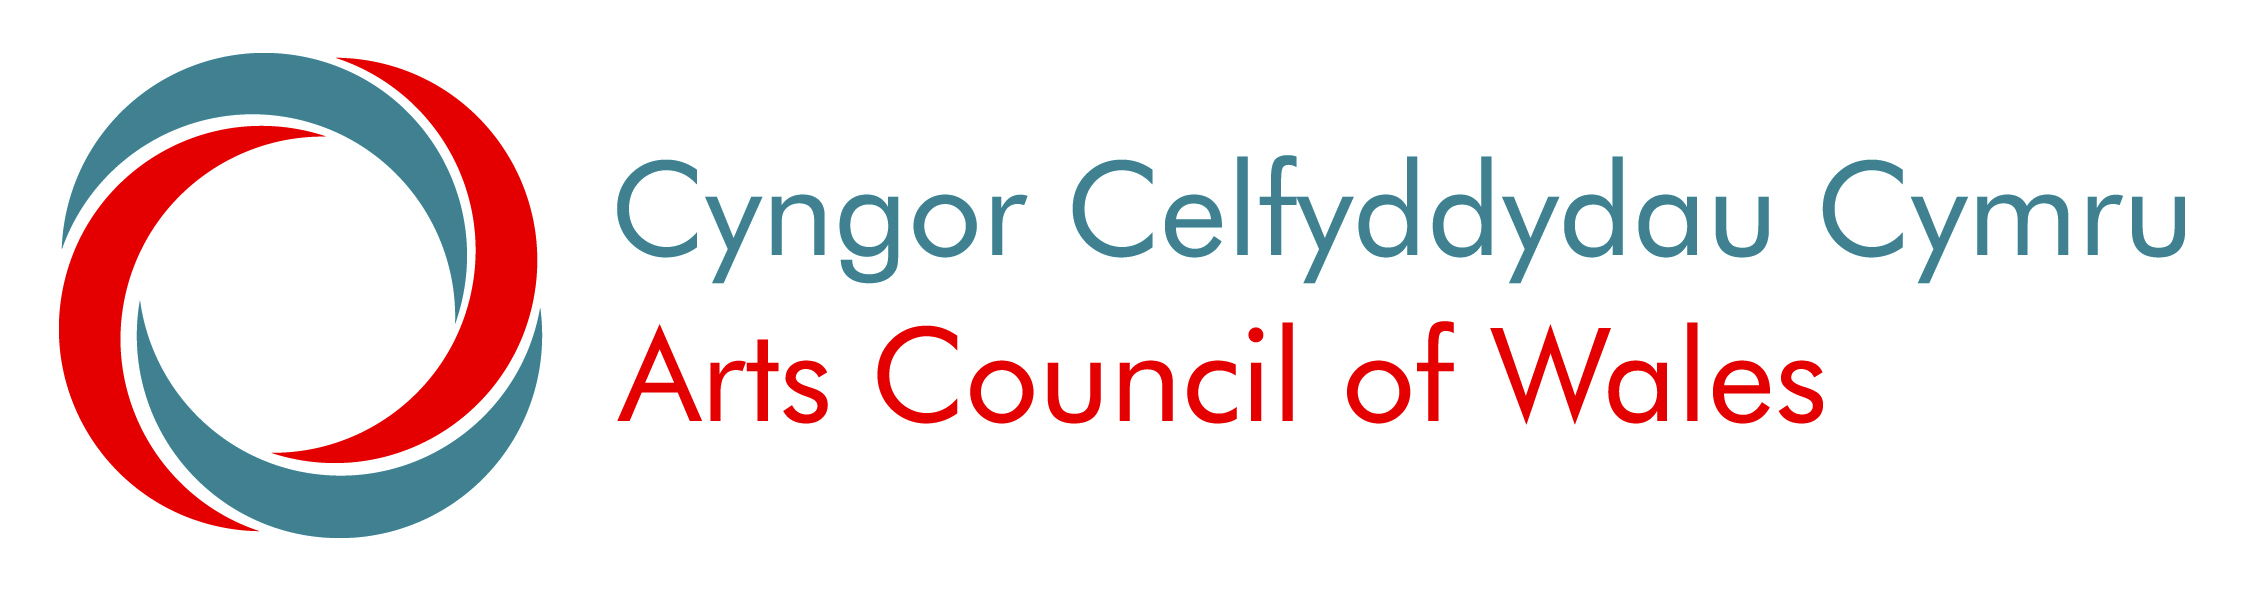 Arts Council of Wales text with two lines entwined in a circle